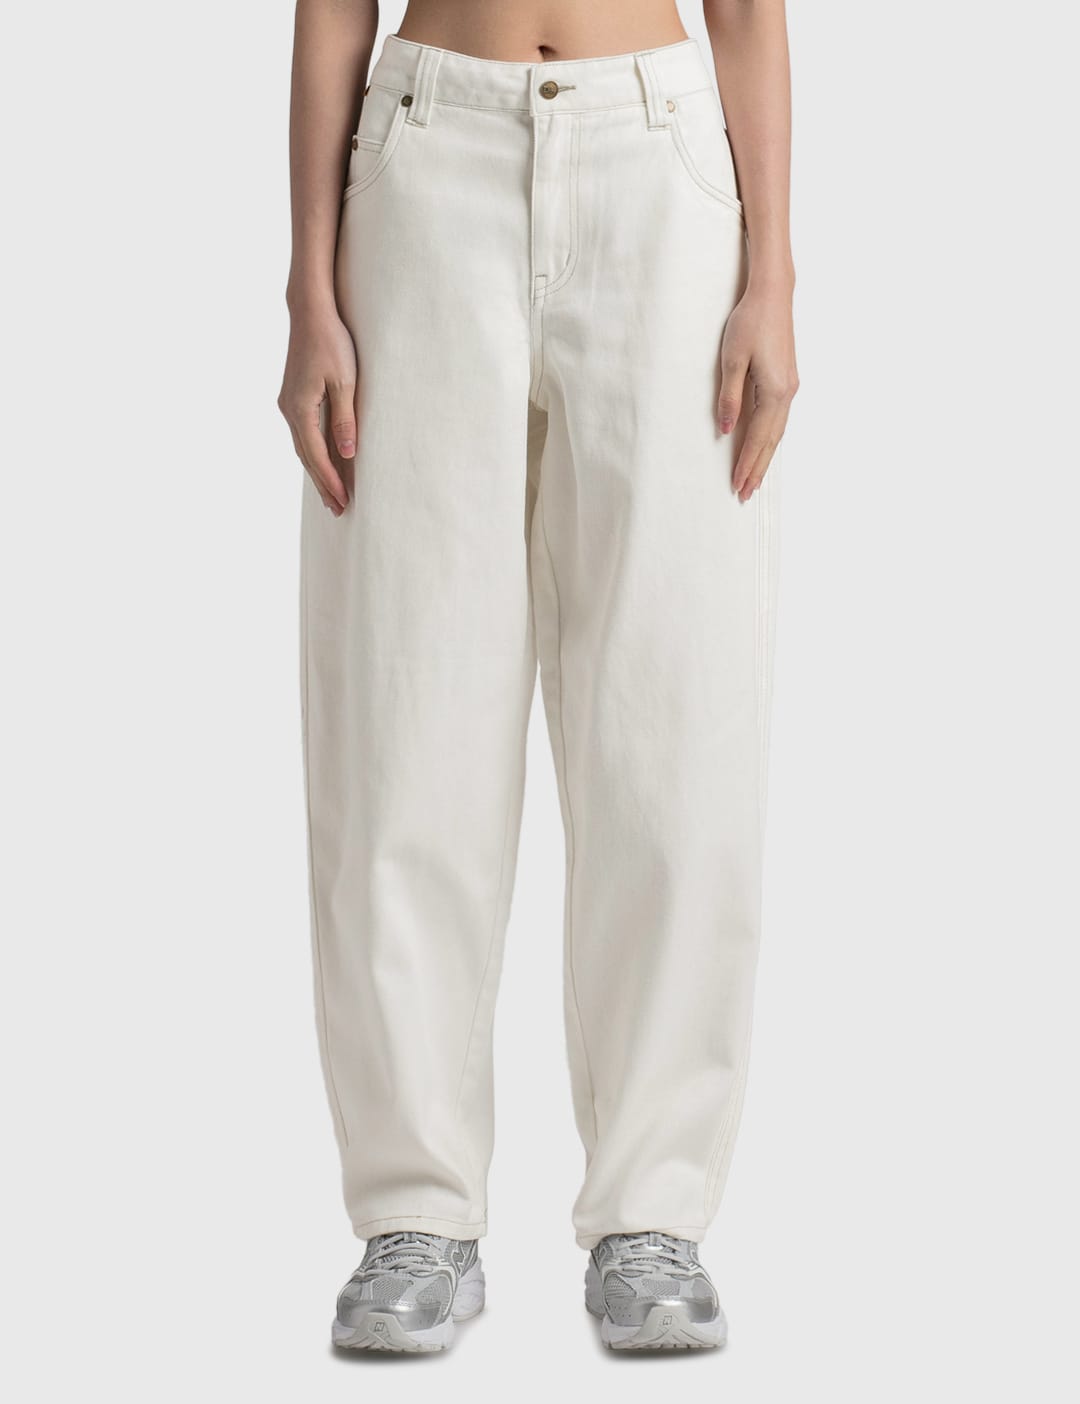 Dime - Baggy Denim Pants | HBX - Globally Curated Fashion and 